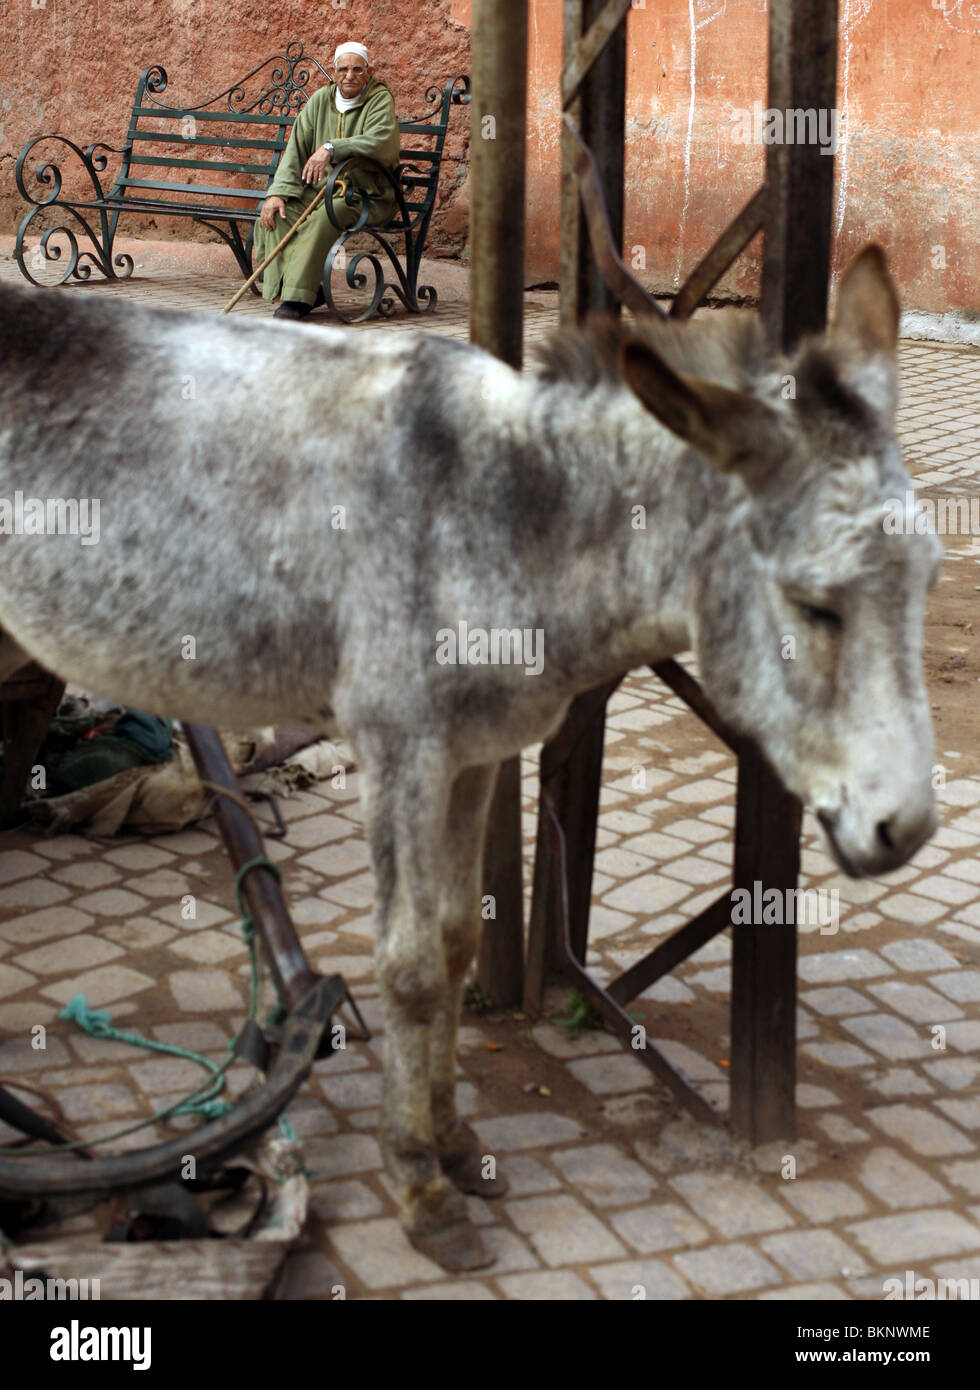 An elderly Moroccan man pictured alongside a Donkey in the Souk in Marrakesh, Morocco. Stock Photo